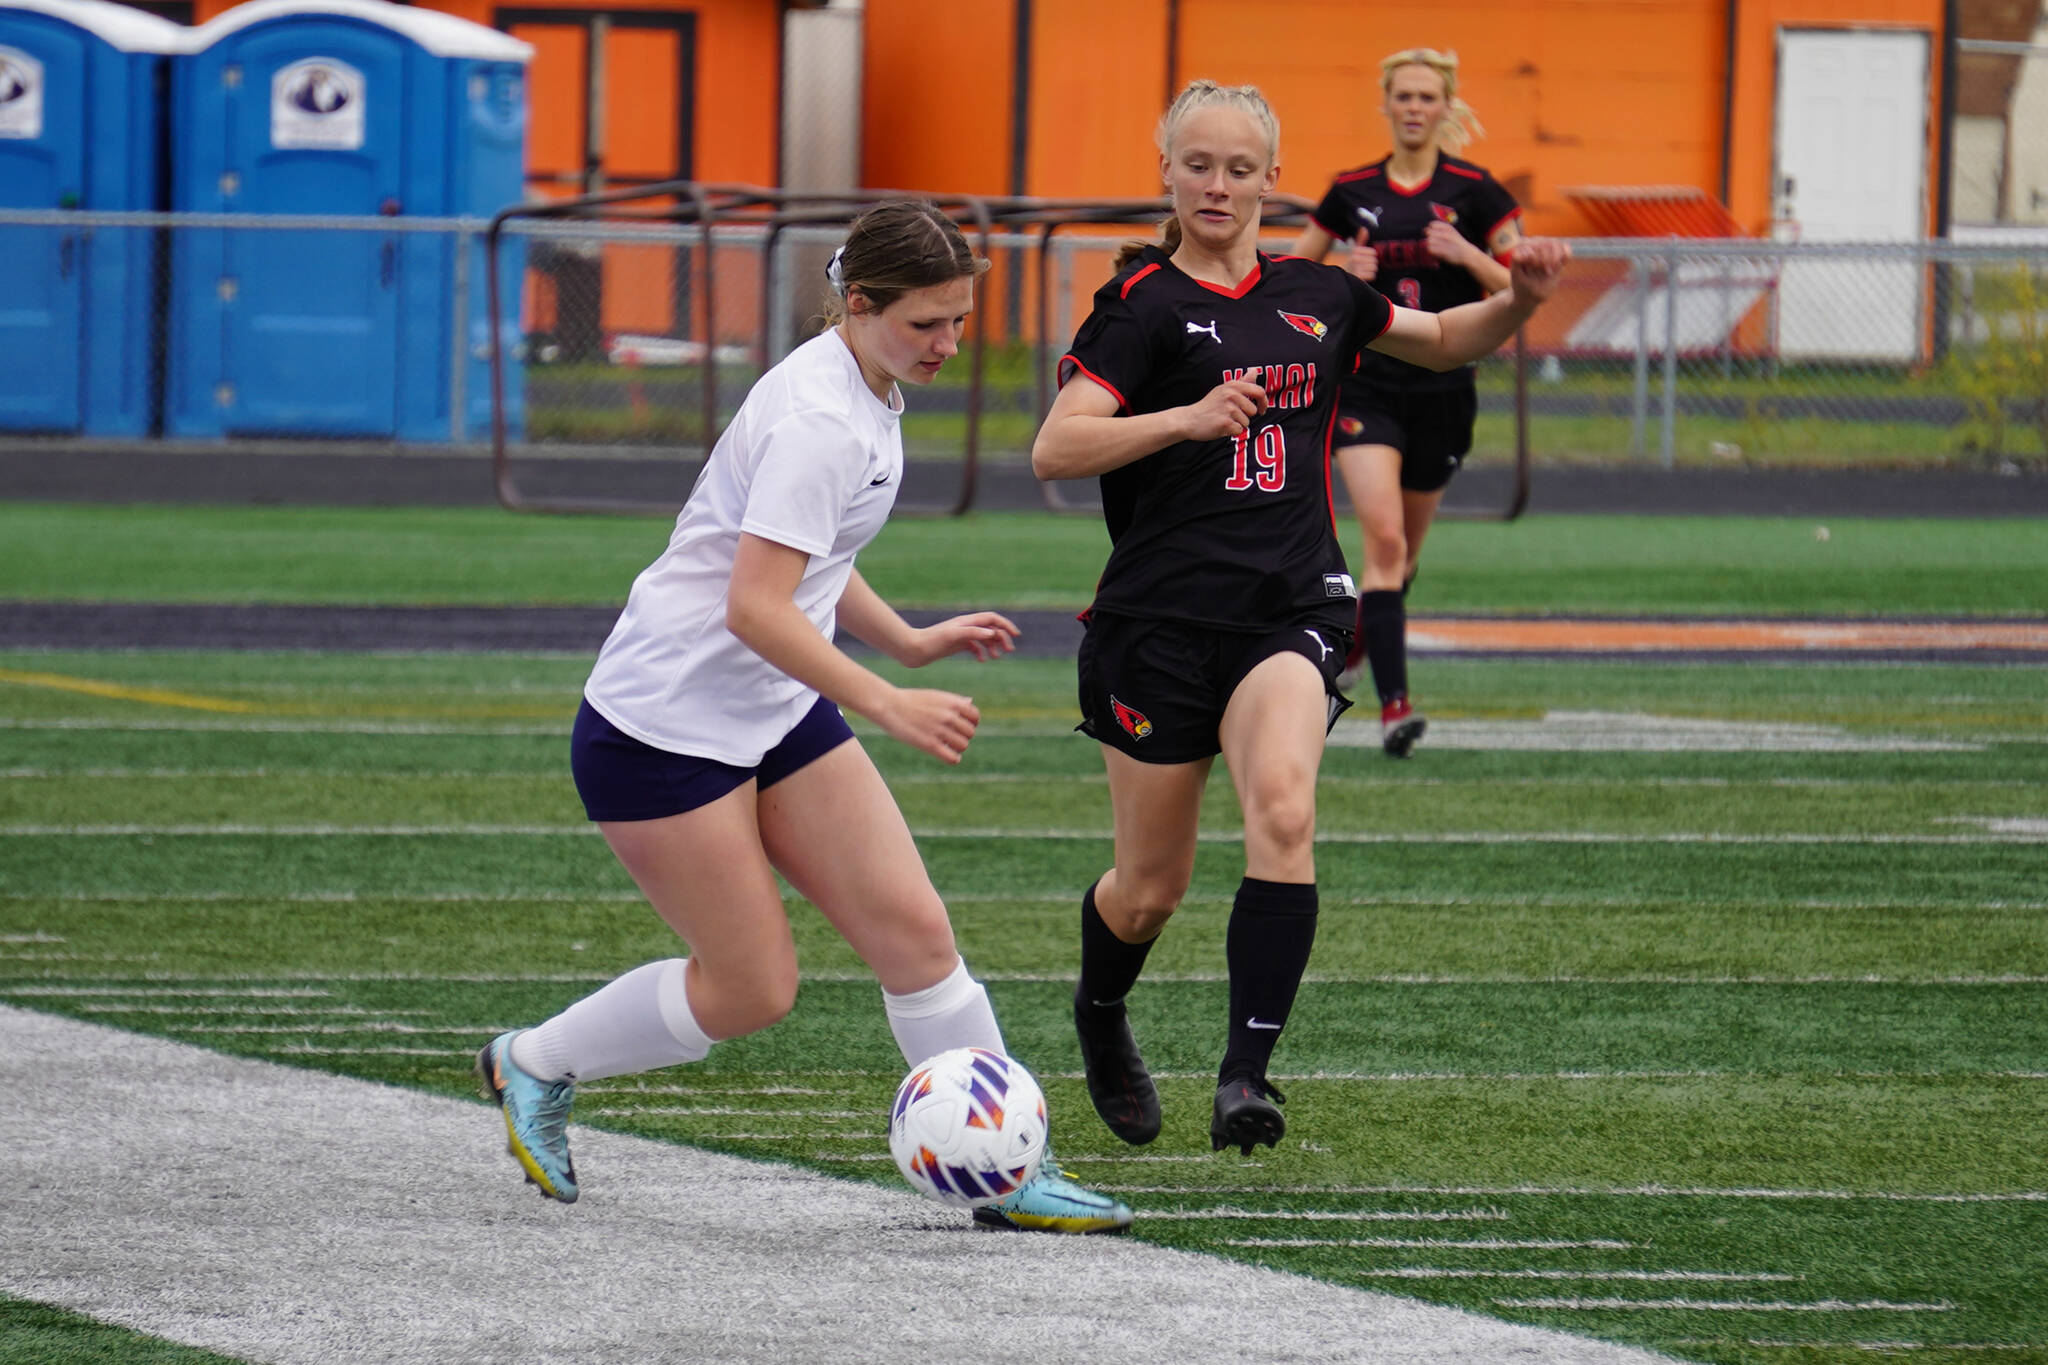 Soldotna’s Anika Jedlicka battles for the ball with Kenai Central’s Rylie Sparks during the Division II Soccer State Championship on Saturday, May 27, 2023, at West Anchorage High School in Anchorage, Alaska. (Jake Dye/Peninsula Clarion)